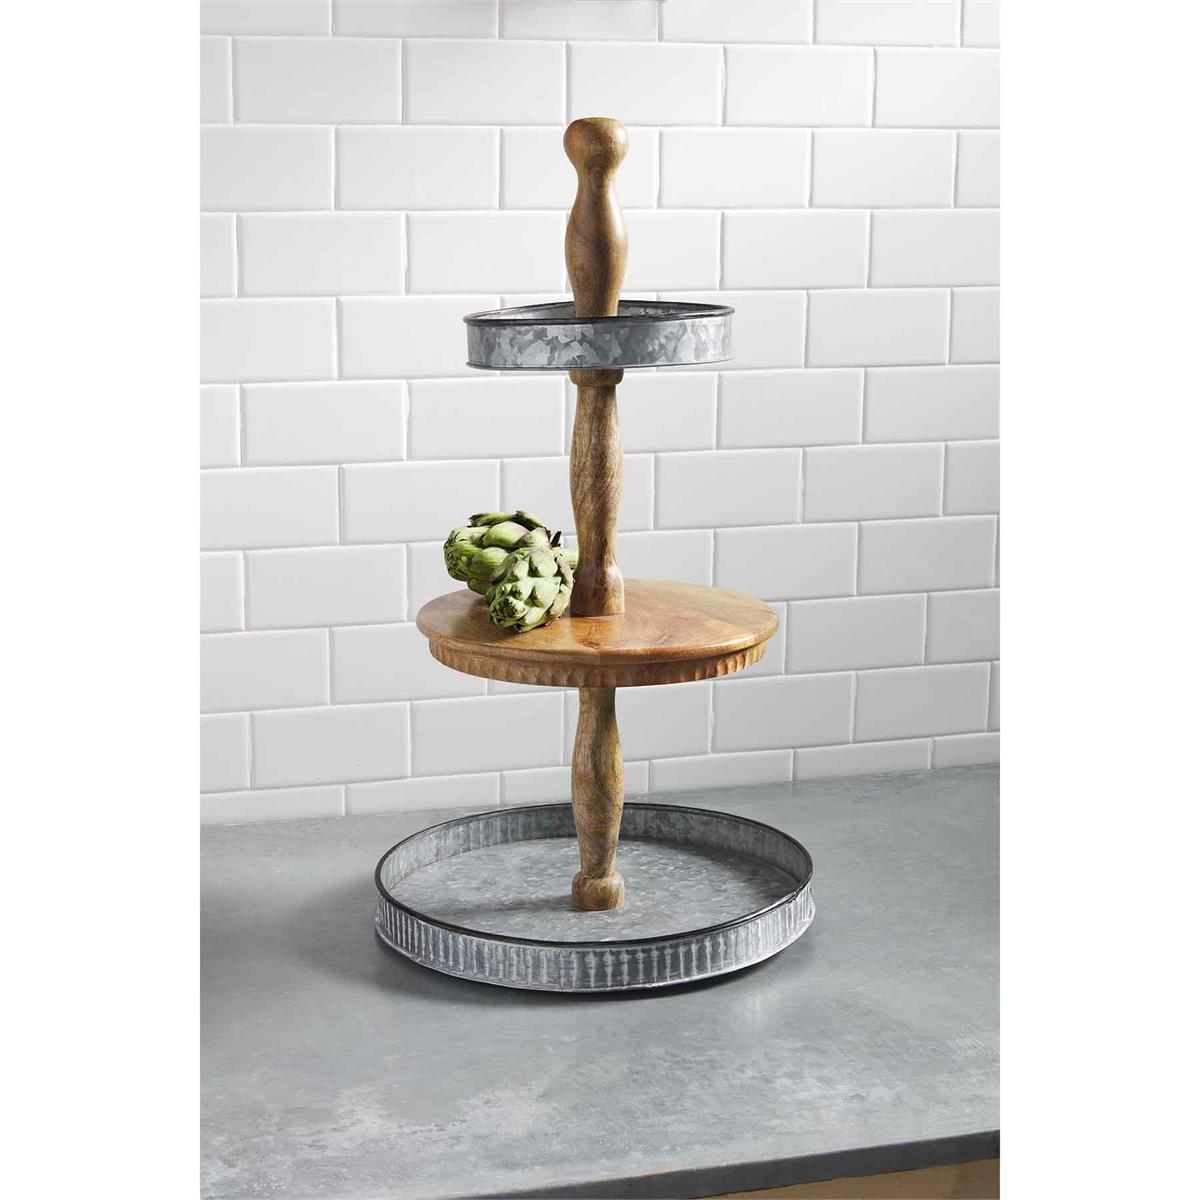 tin and wood tiered server displayed with two artichokes on a dark gray countertop